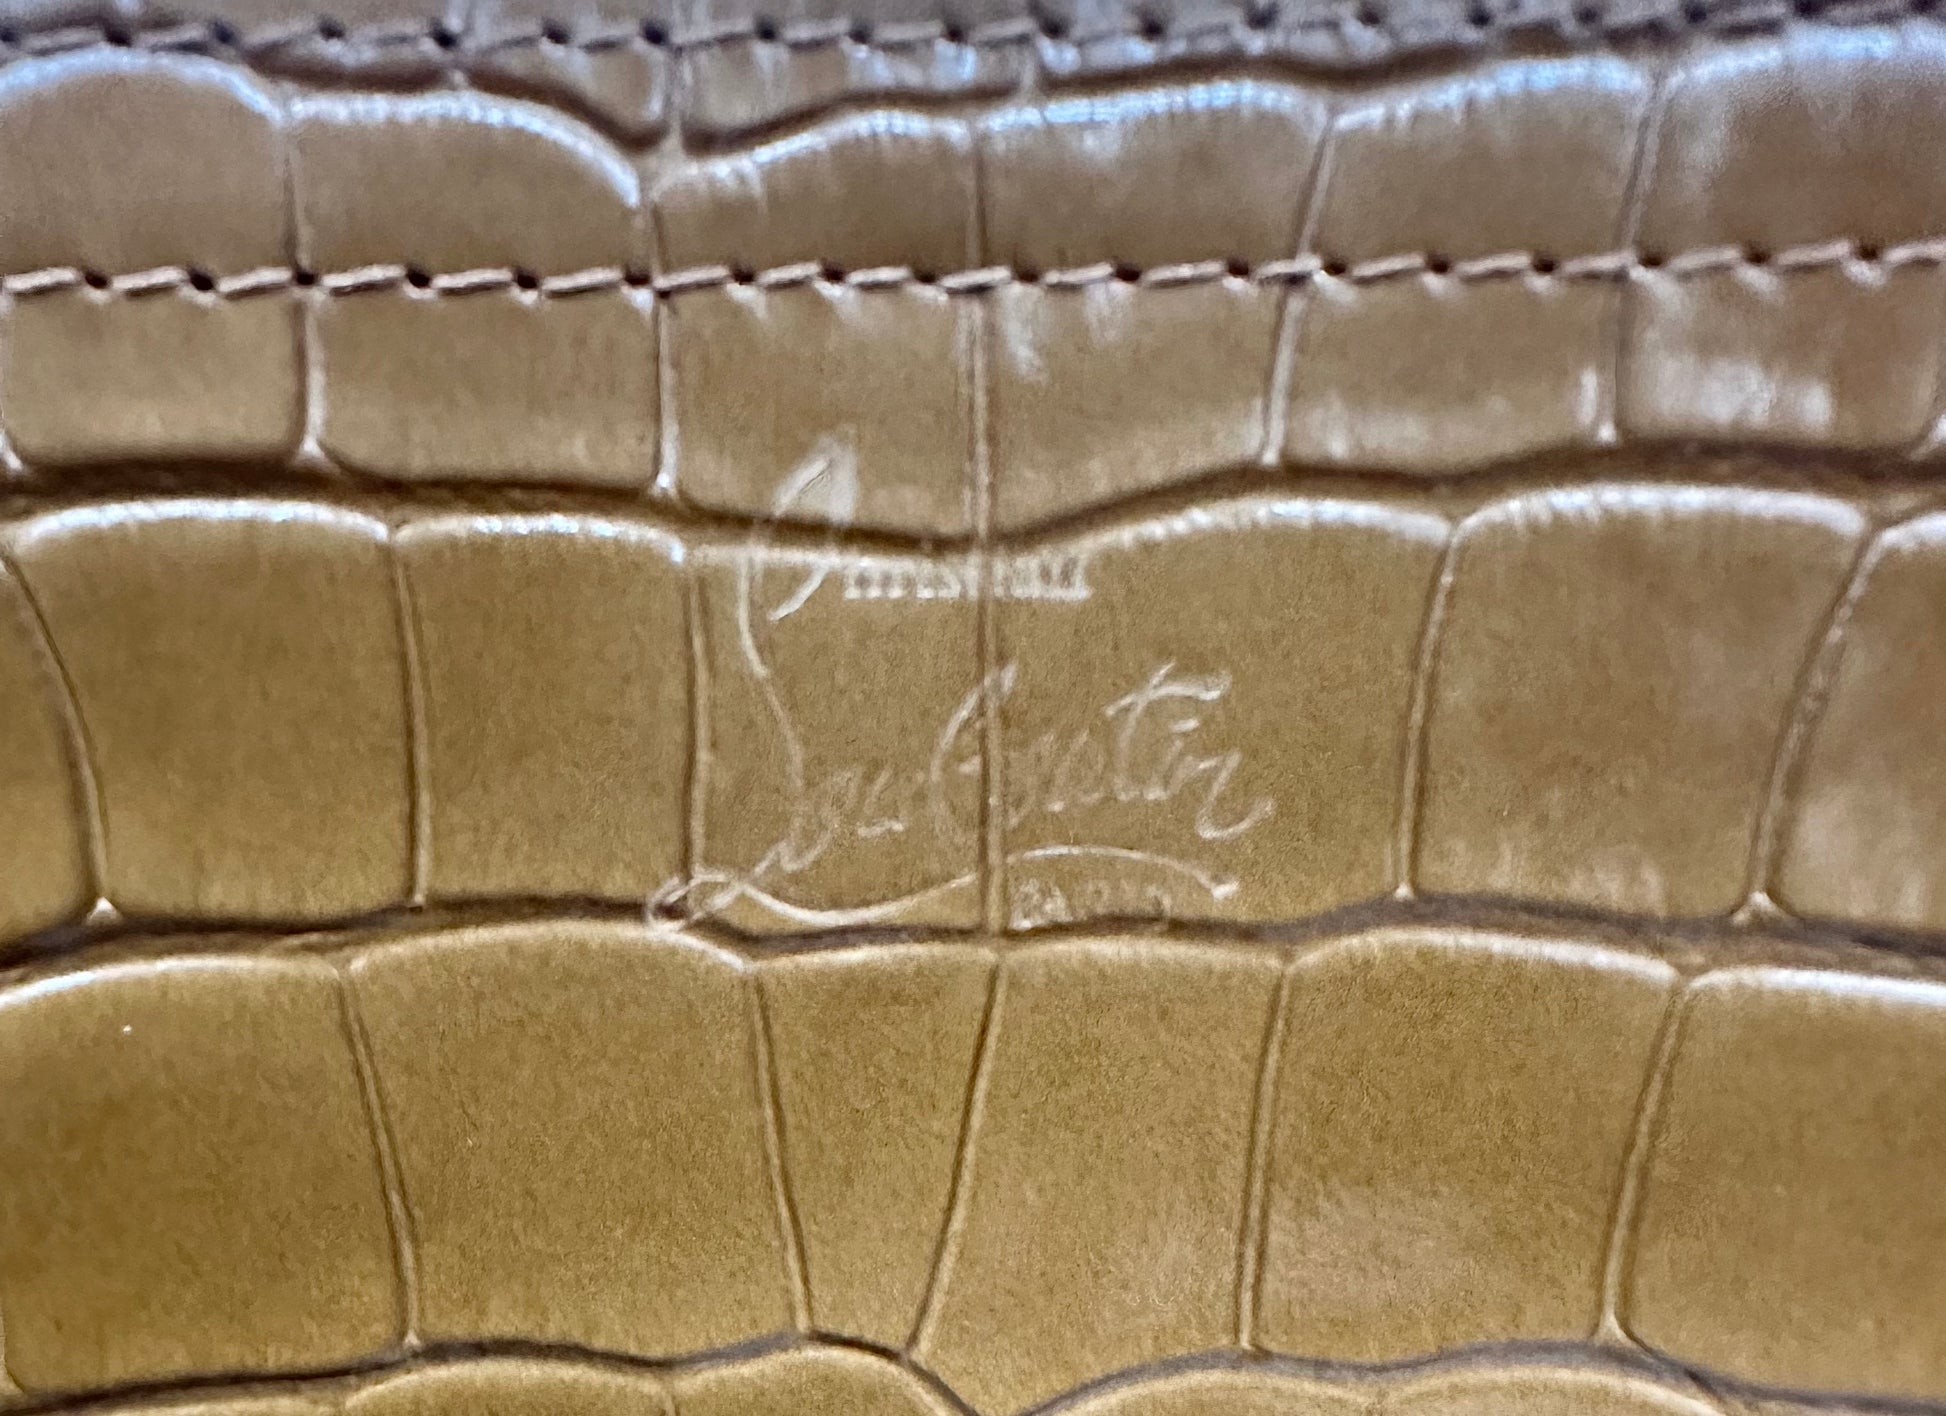 Christian Louboutin stamp on outside of purse